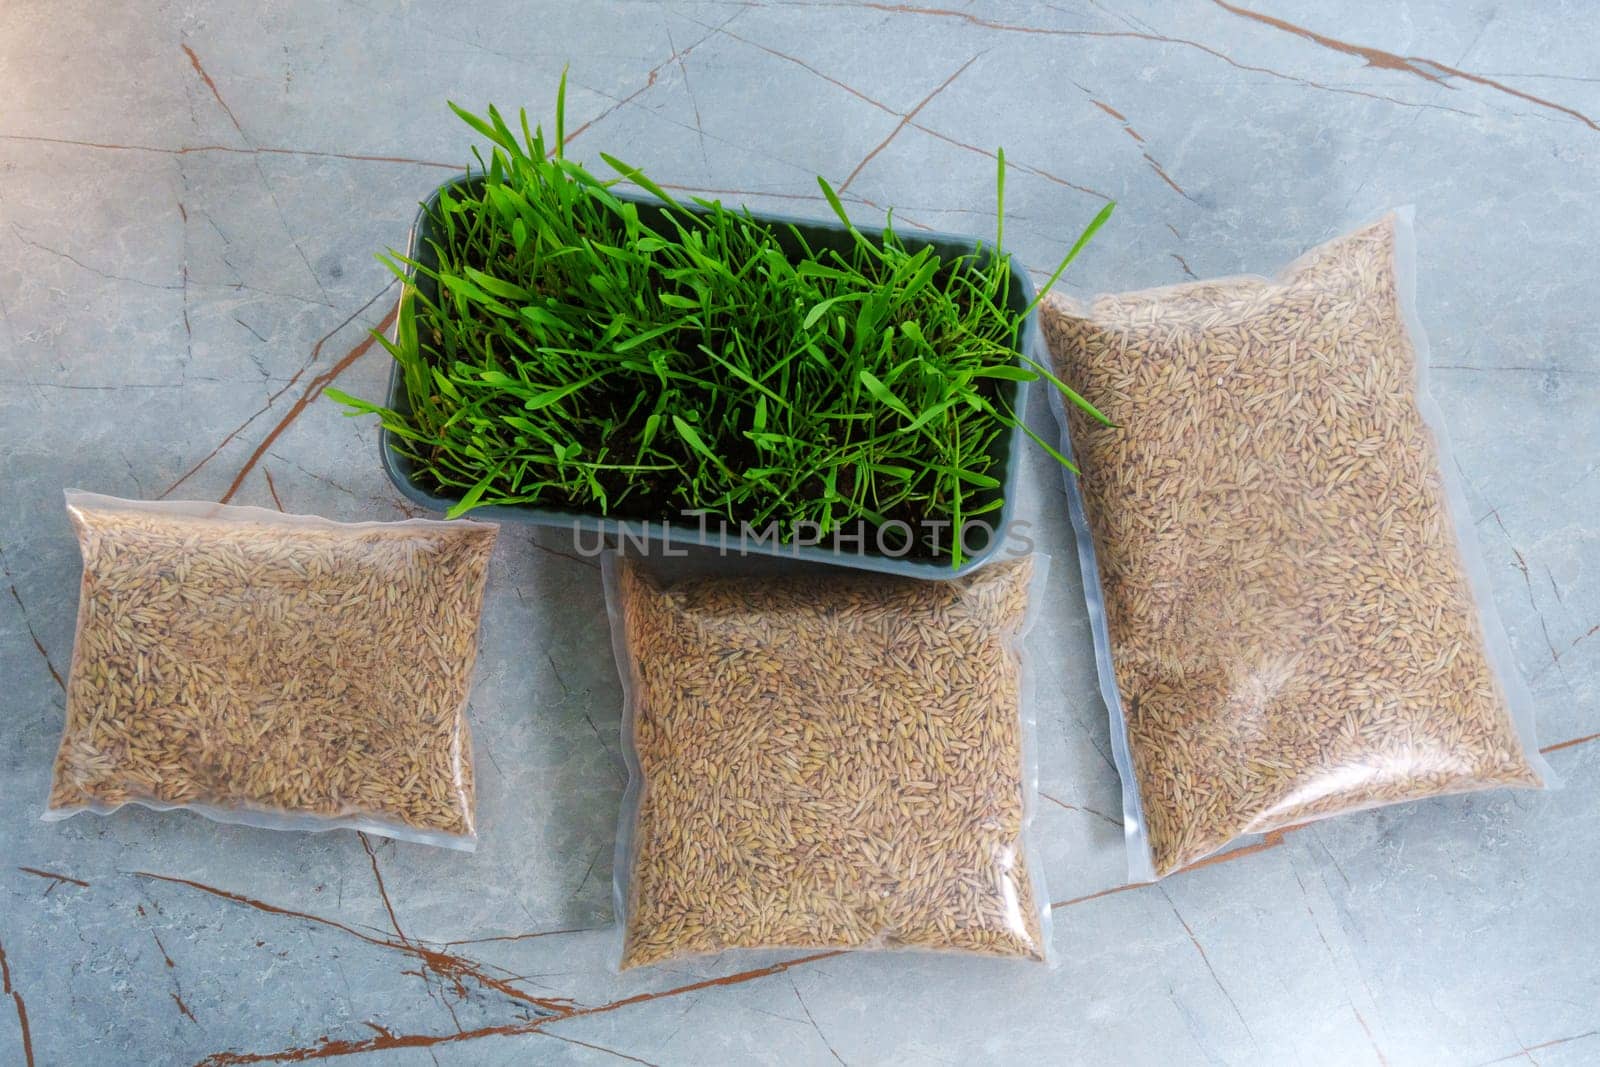 Bags filled with fresh grass, possibly for cats or growing microgreens, are placed side by side. by darksoul72